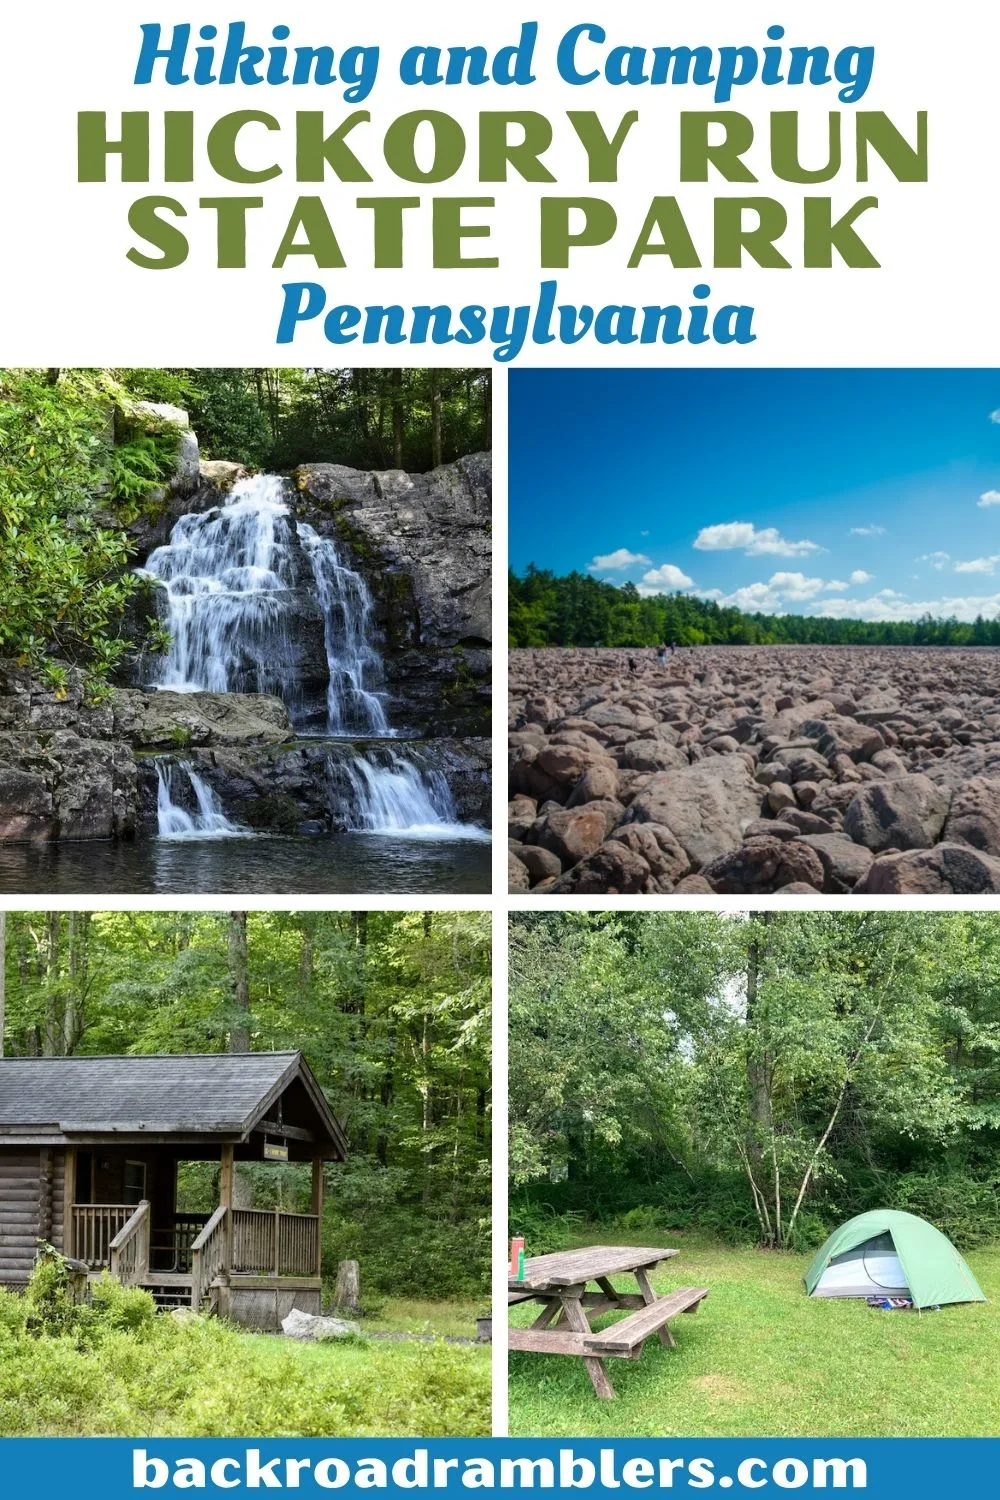 A collage of photos featuring hiking and camping in Hickory Run State Park in Pennsylvania. The caption reads Hiking and Camping in Hickory Run State Park Pennsylvania.